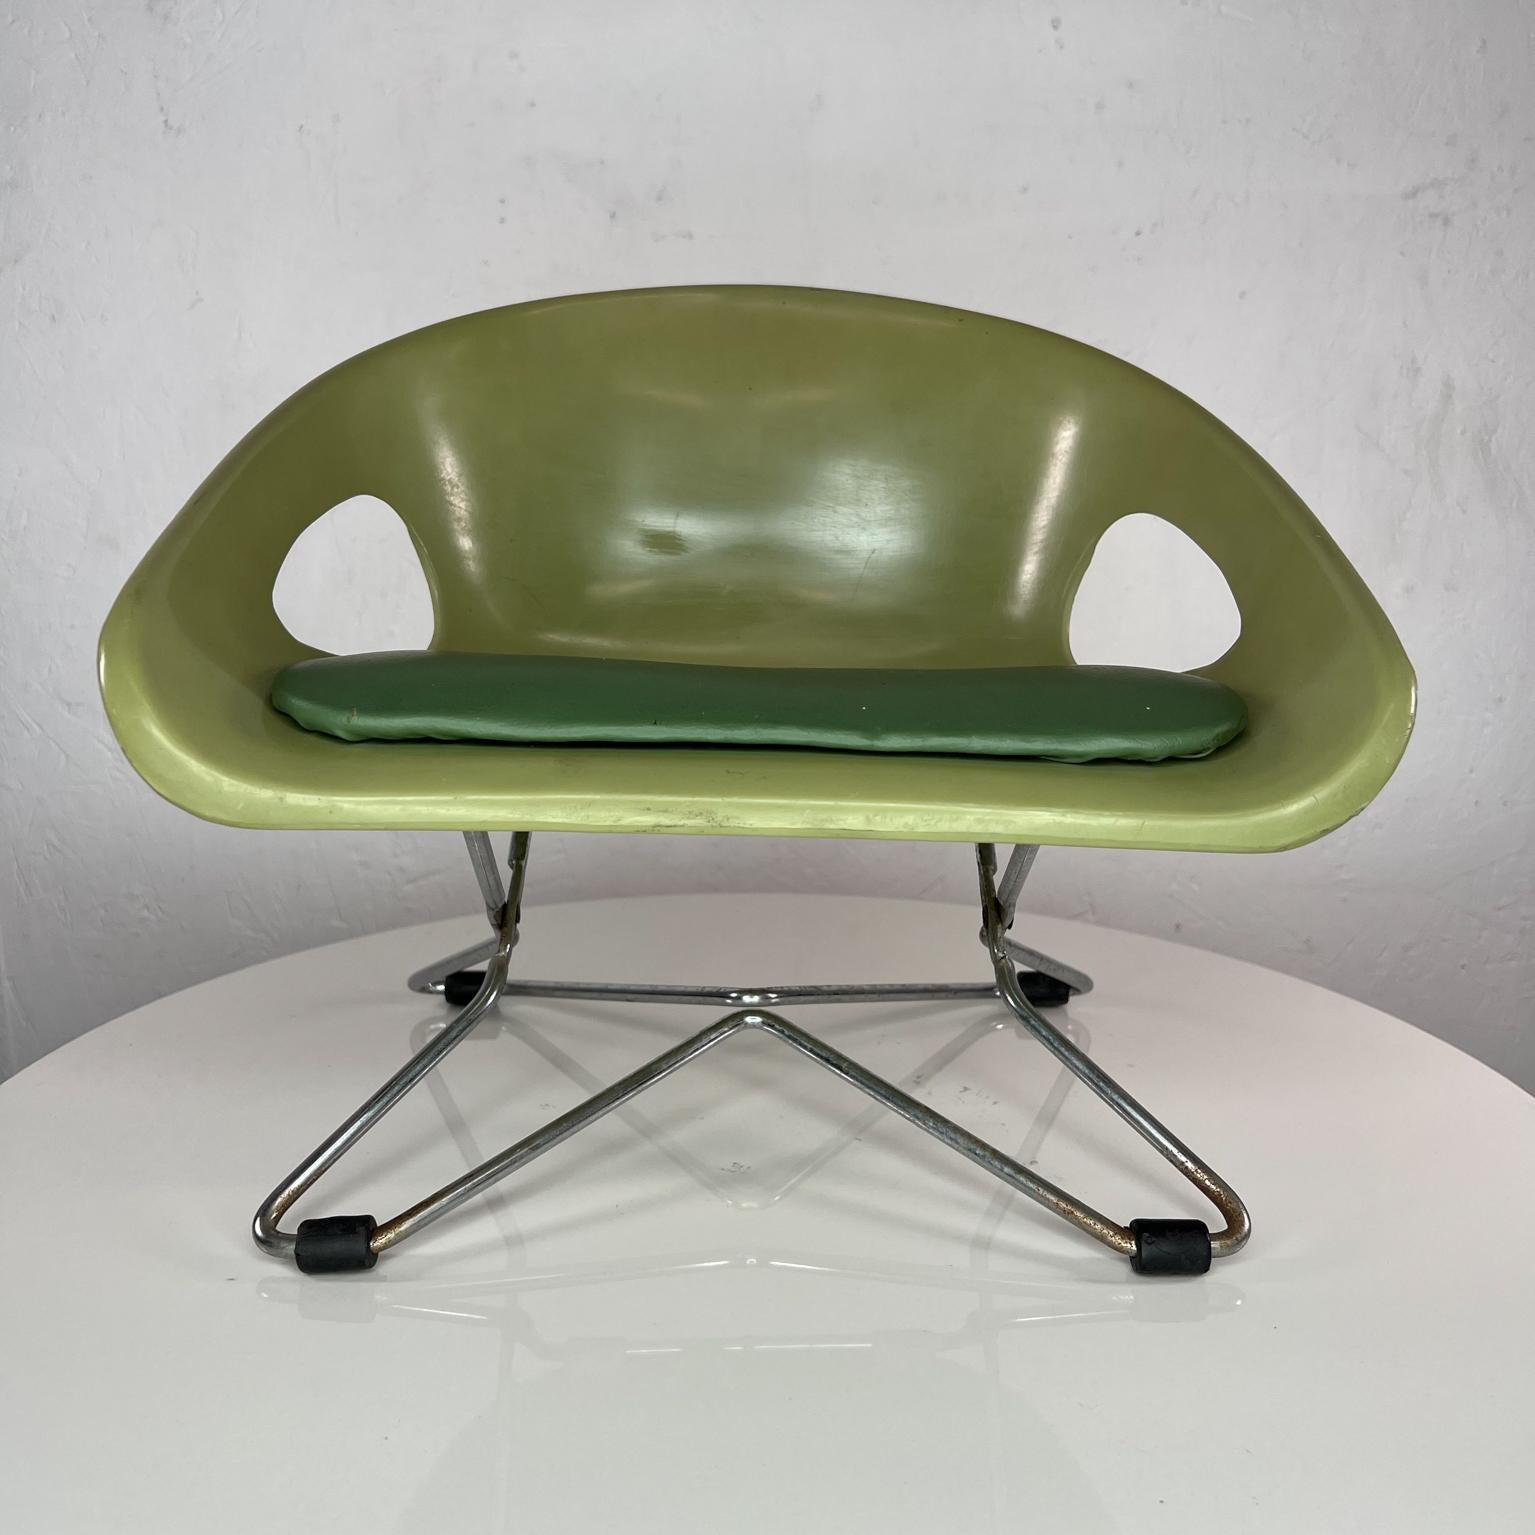 1960s Modern Eames style vintage cosco kid's chair booster seat in Avocado Green
Cushion Pad Chrome and Plastic with Hairpin Legs! Made Columbus, Indiana
12 tall x 13.75 w x 10.5 d Seat h 7
Preowned original vintage condition
Refer to images.
 